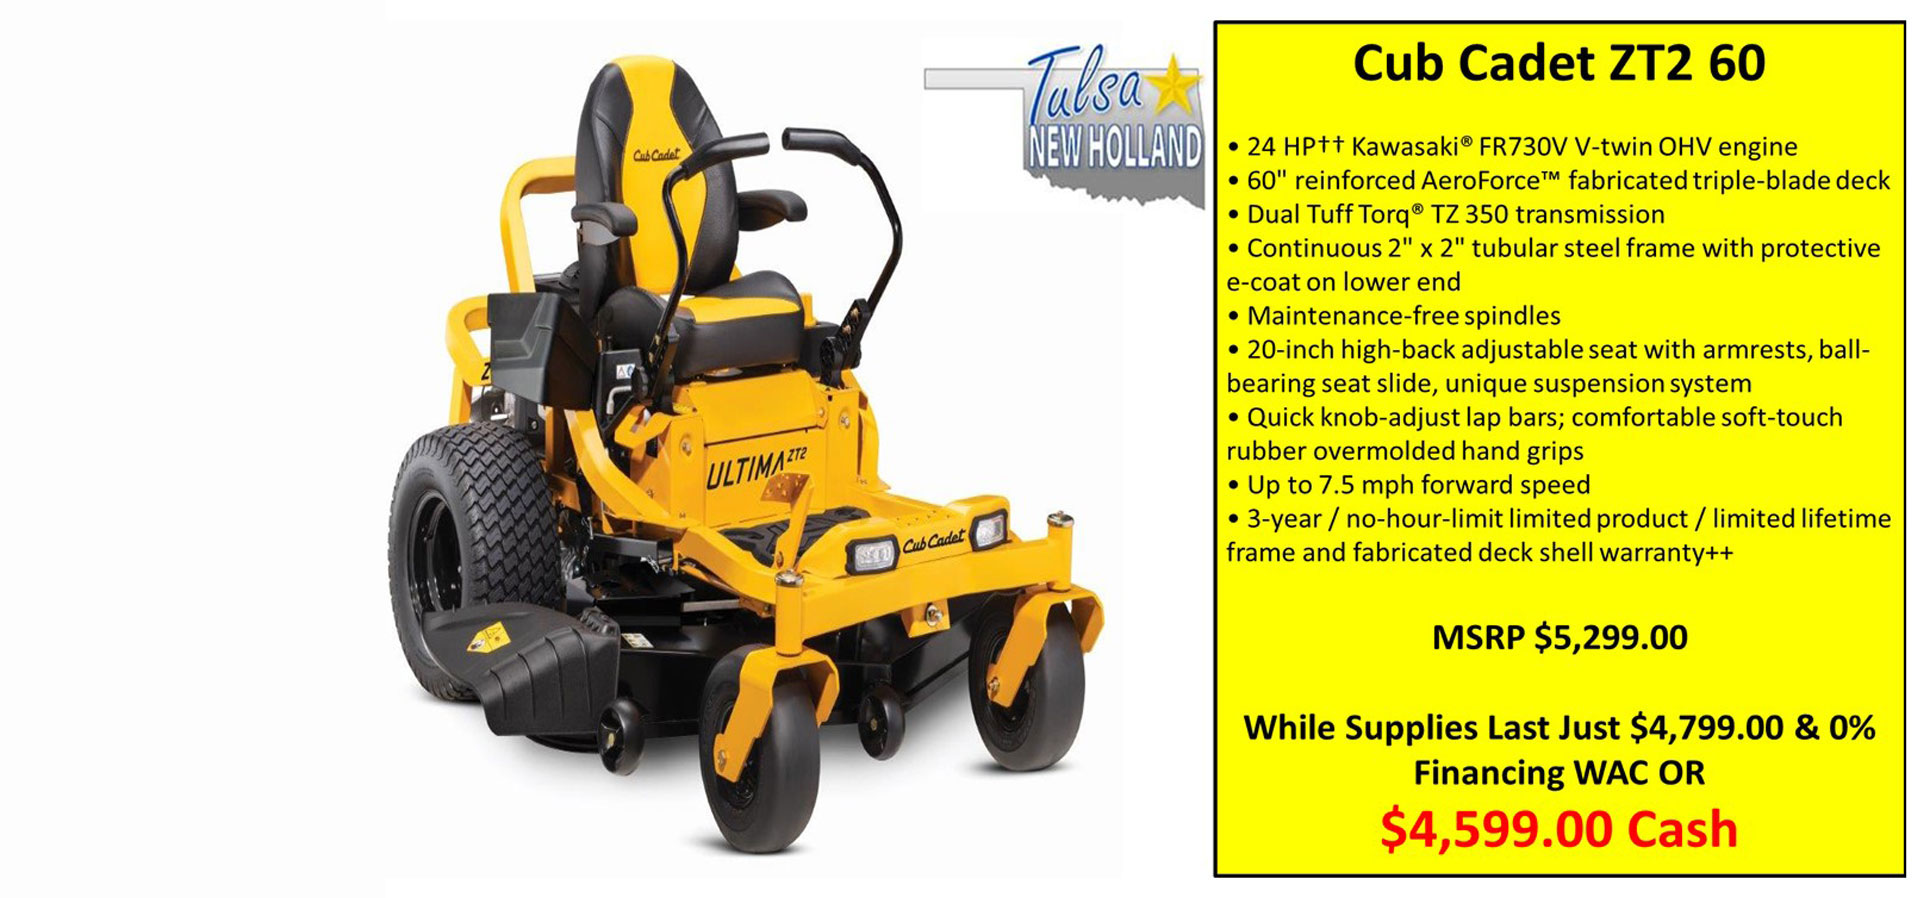 Tulsa New Holland, INC - Cub Cadet ZT2 60 Zero Turn Mower - Special Financing And Cash Price Offer